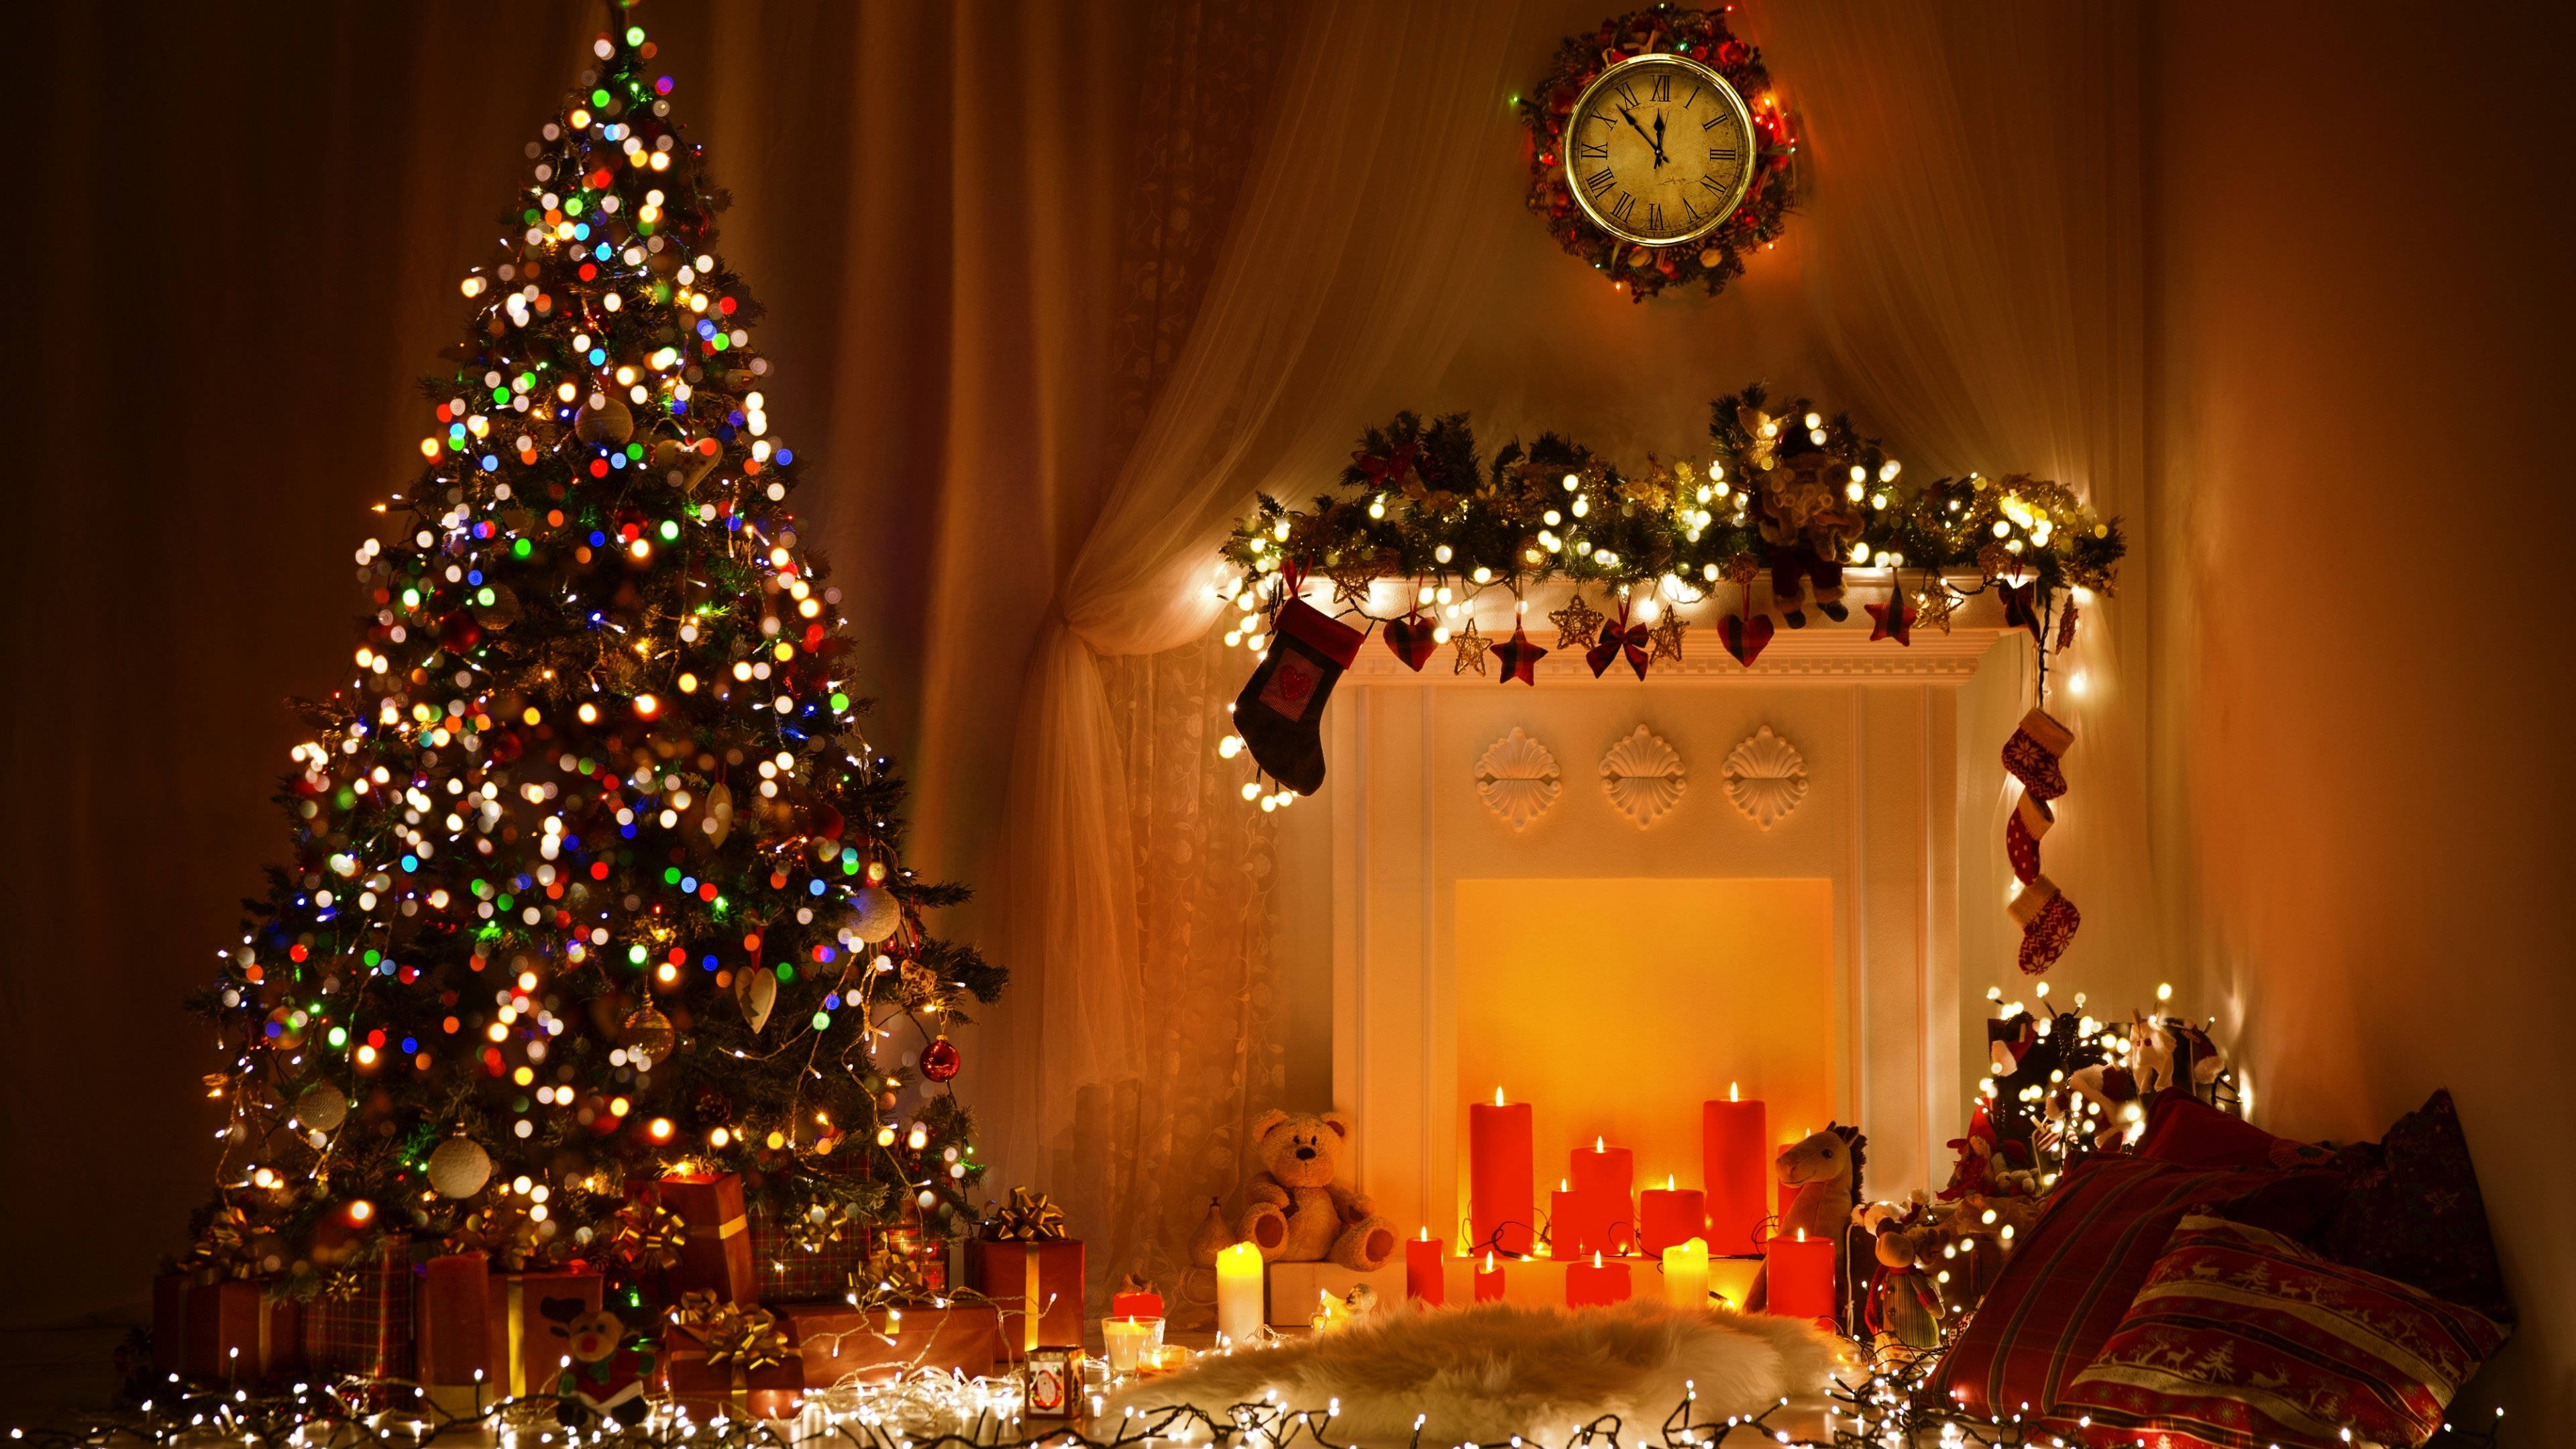 Cool And Cosy Christmas At Home Desktop Wallpaper